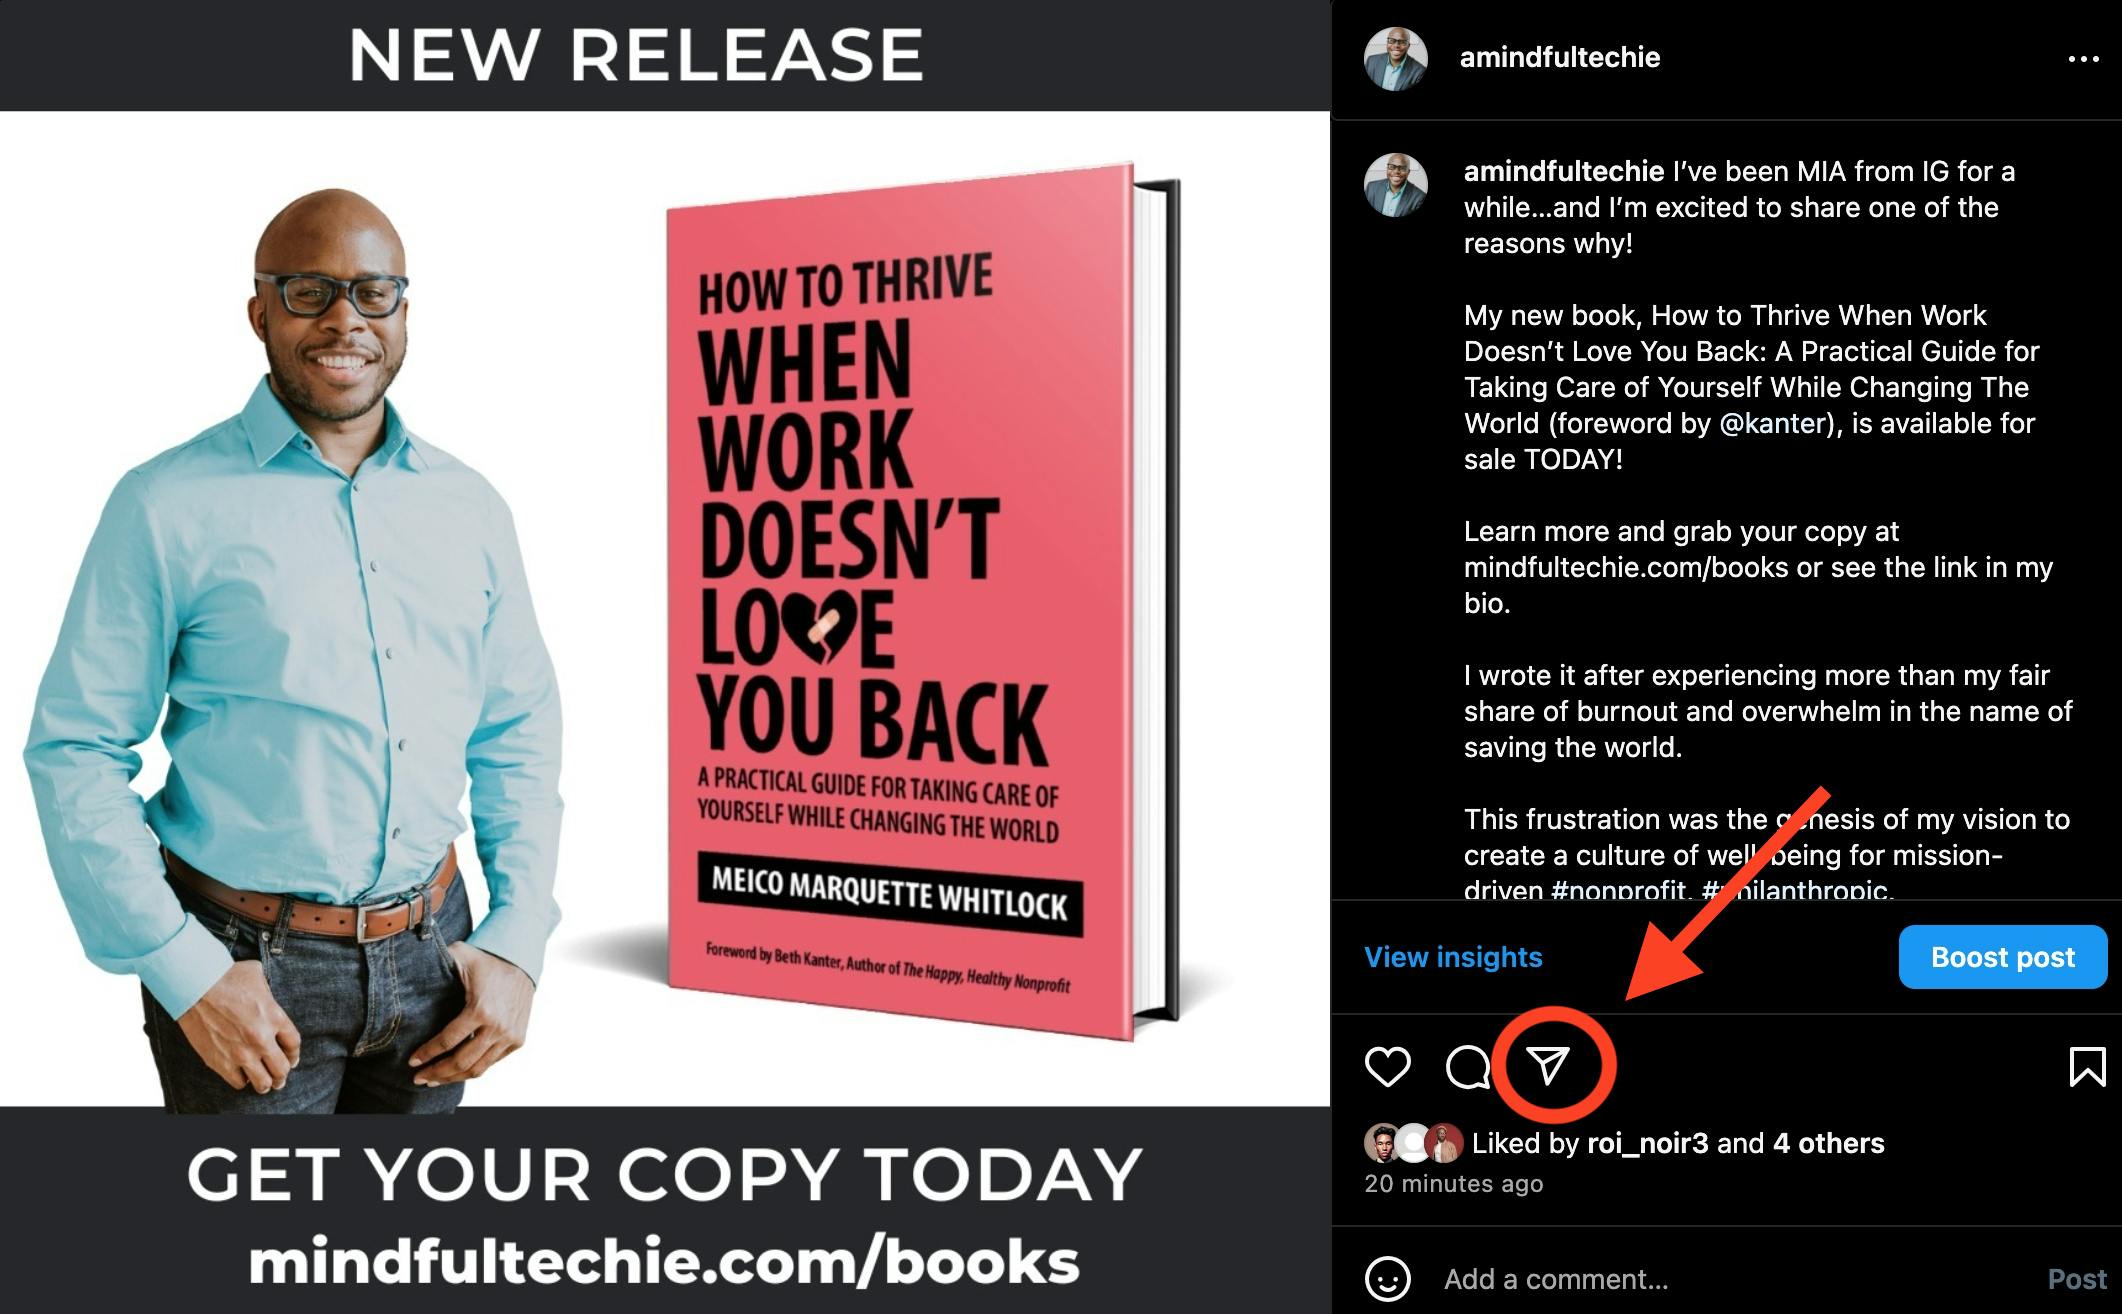 Instagram post of How to Thrive When Work Doesn't Love You Back book